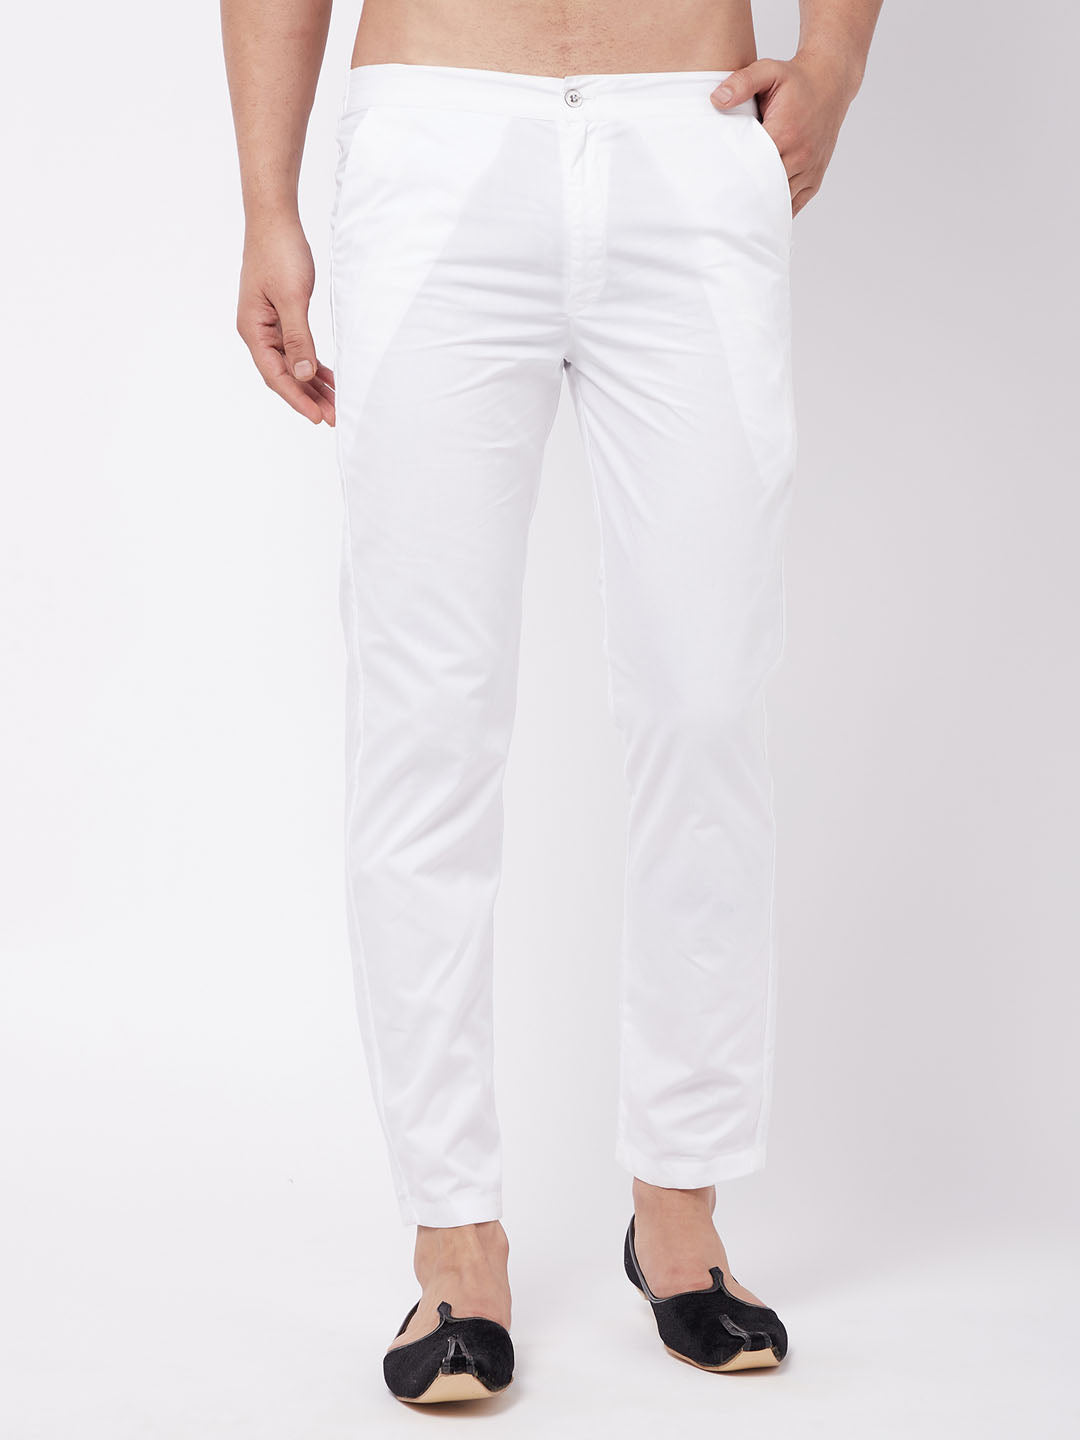 Mens Linen Trousers CLASSIC WHITE  Pink House Mustique